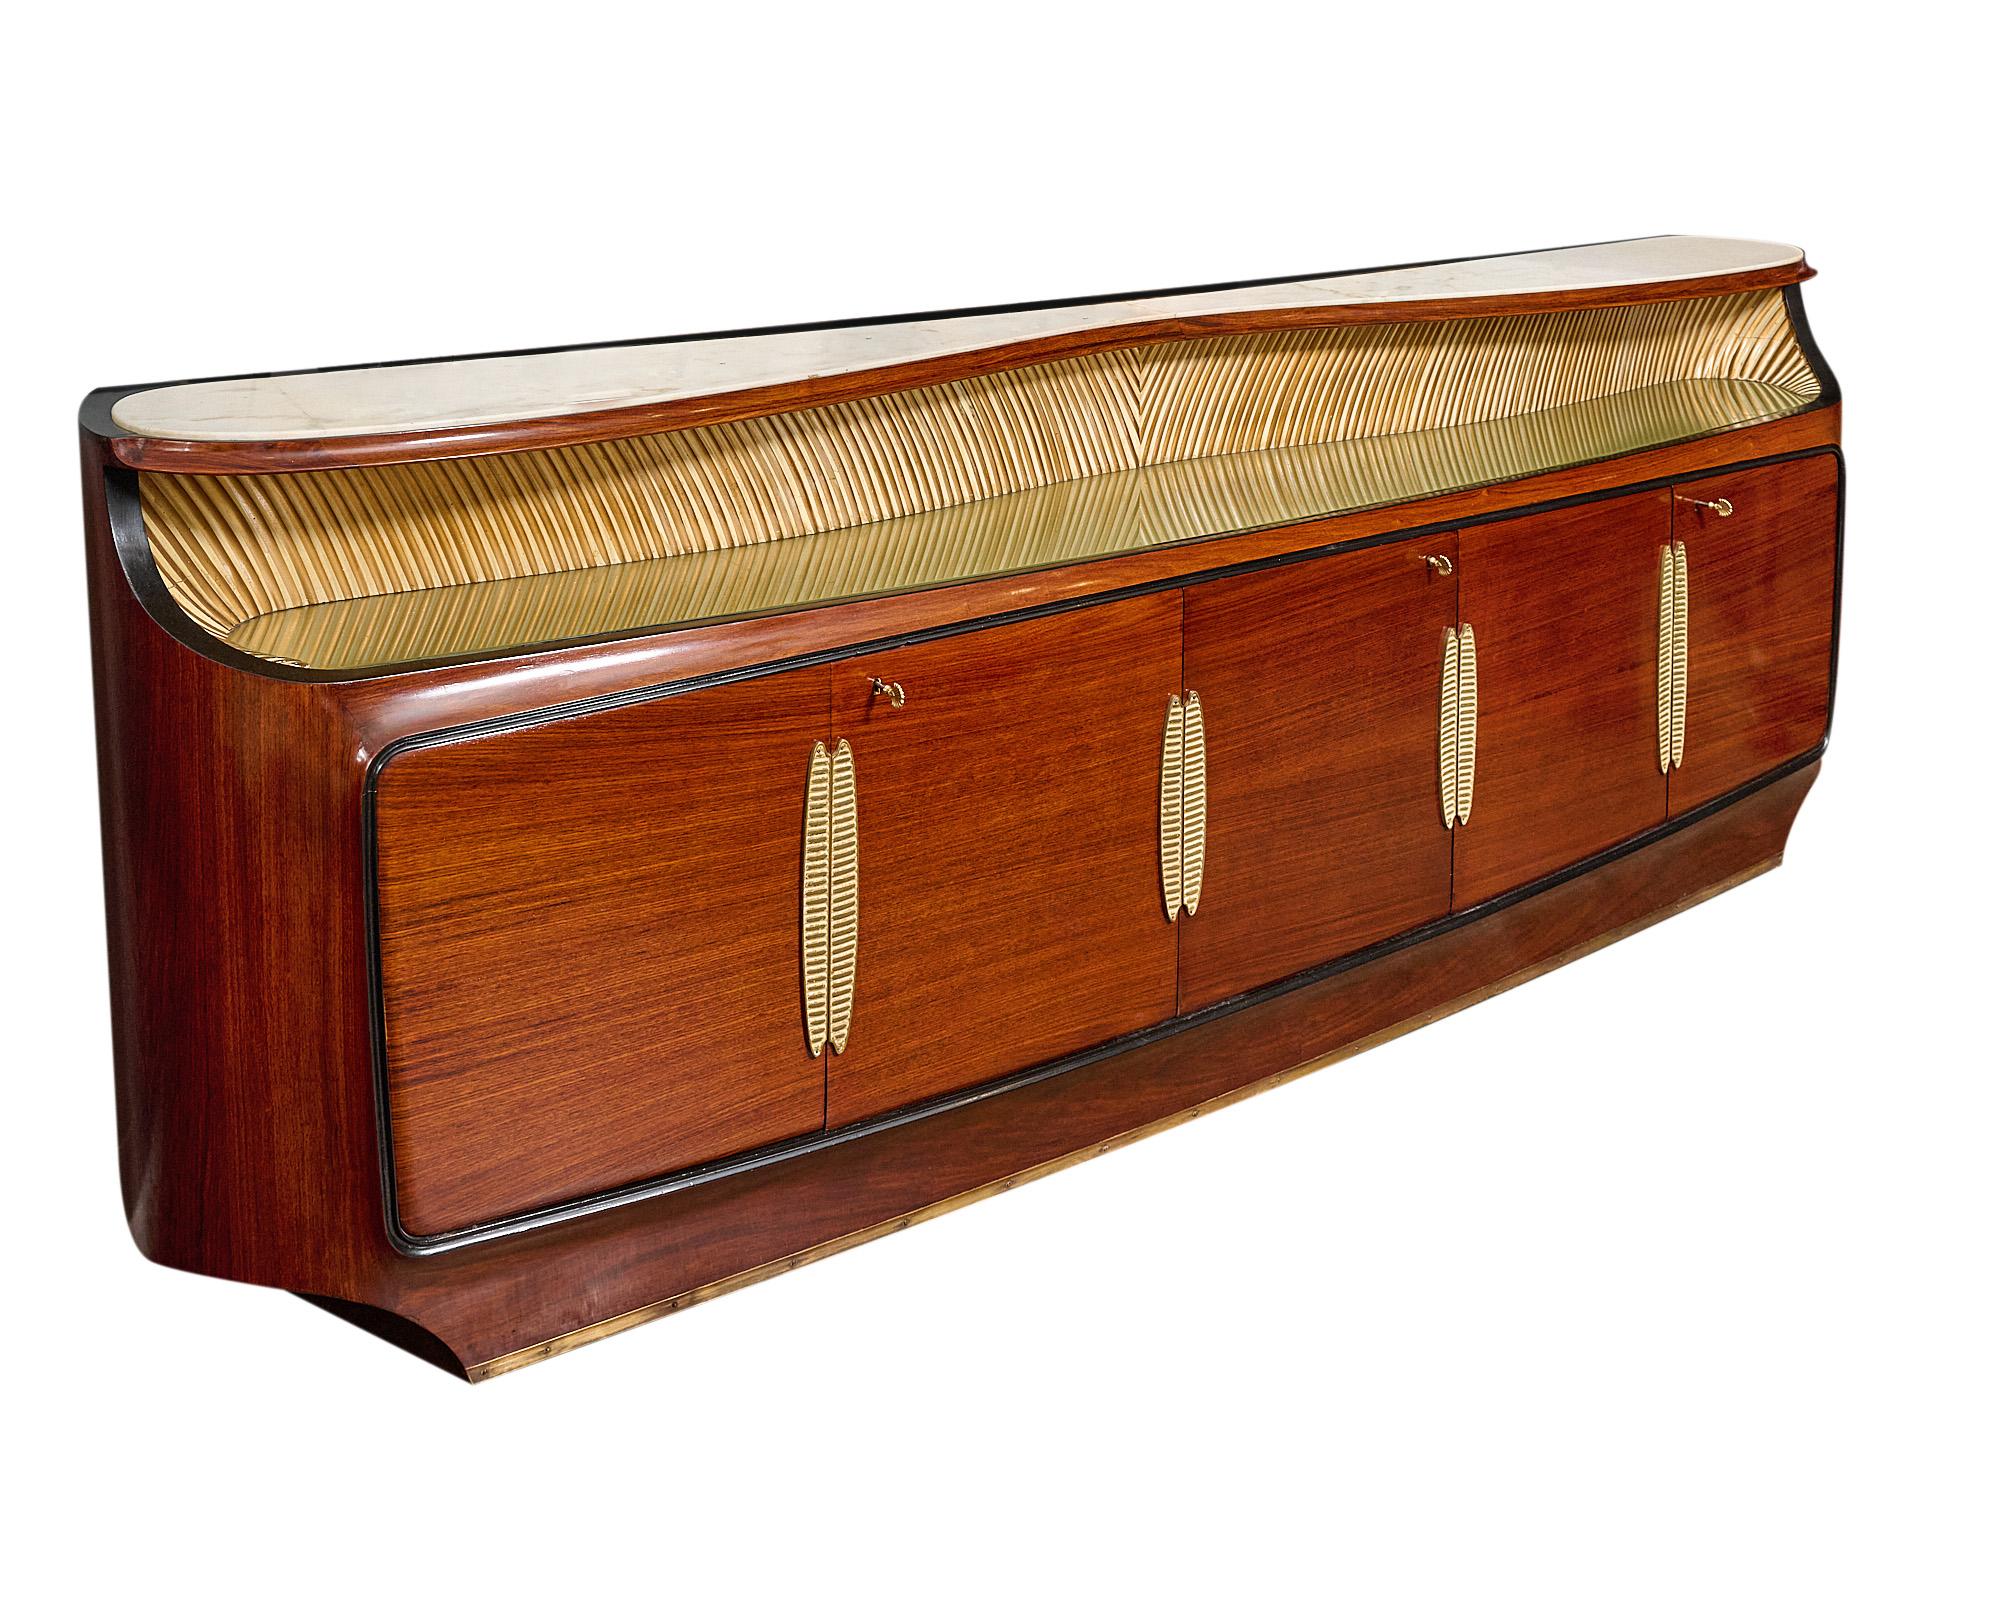 Grande buffet, credenza, Italian, of rosewood finished in a lustrous French polish, in the style of iconic designer Osvaldo Borsani, the rounded side board boasts five doors opening to ample storage and bar. Gilt brass hardware, working locks and